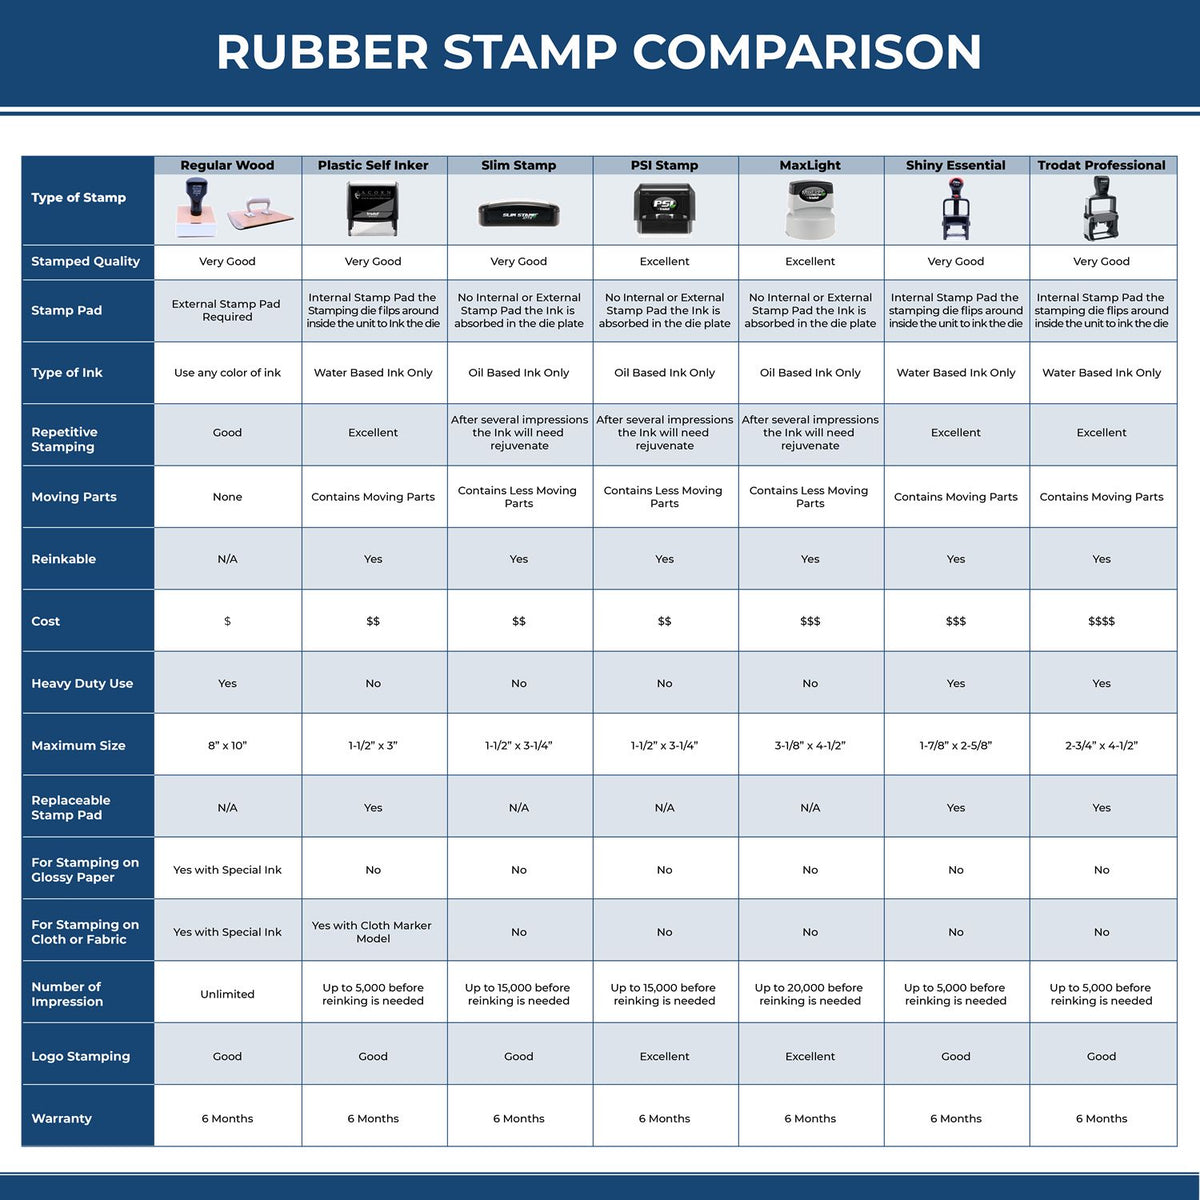 A comparison chart for the different types of mount models available for the Premium MaxLight Pre-Inked Guam Engineering Stamp.